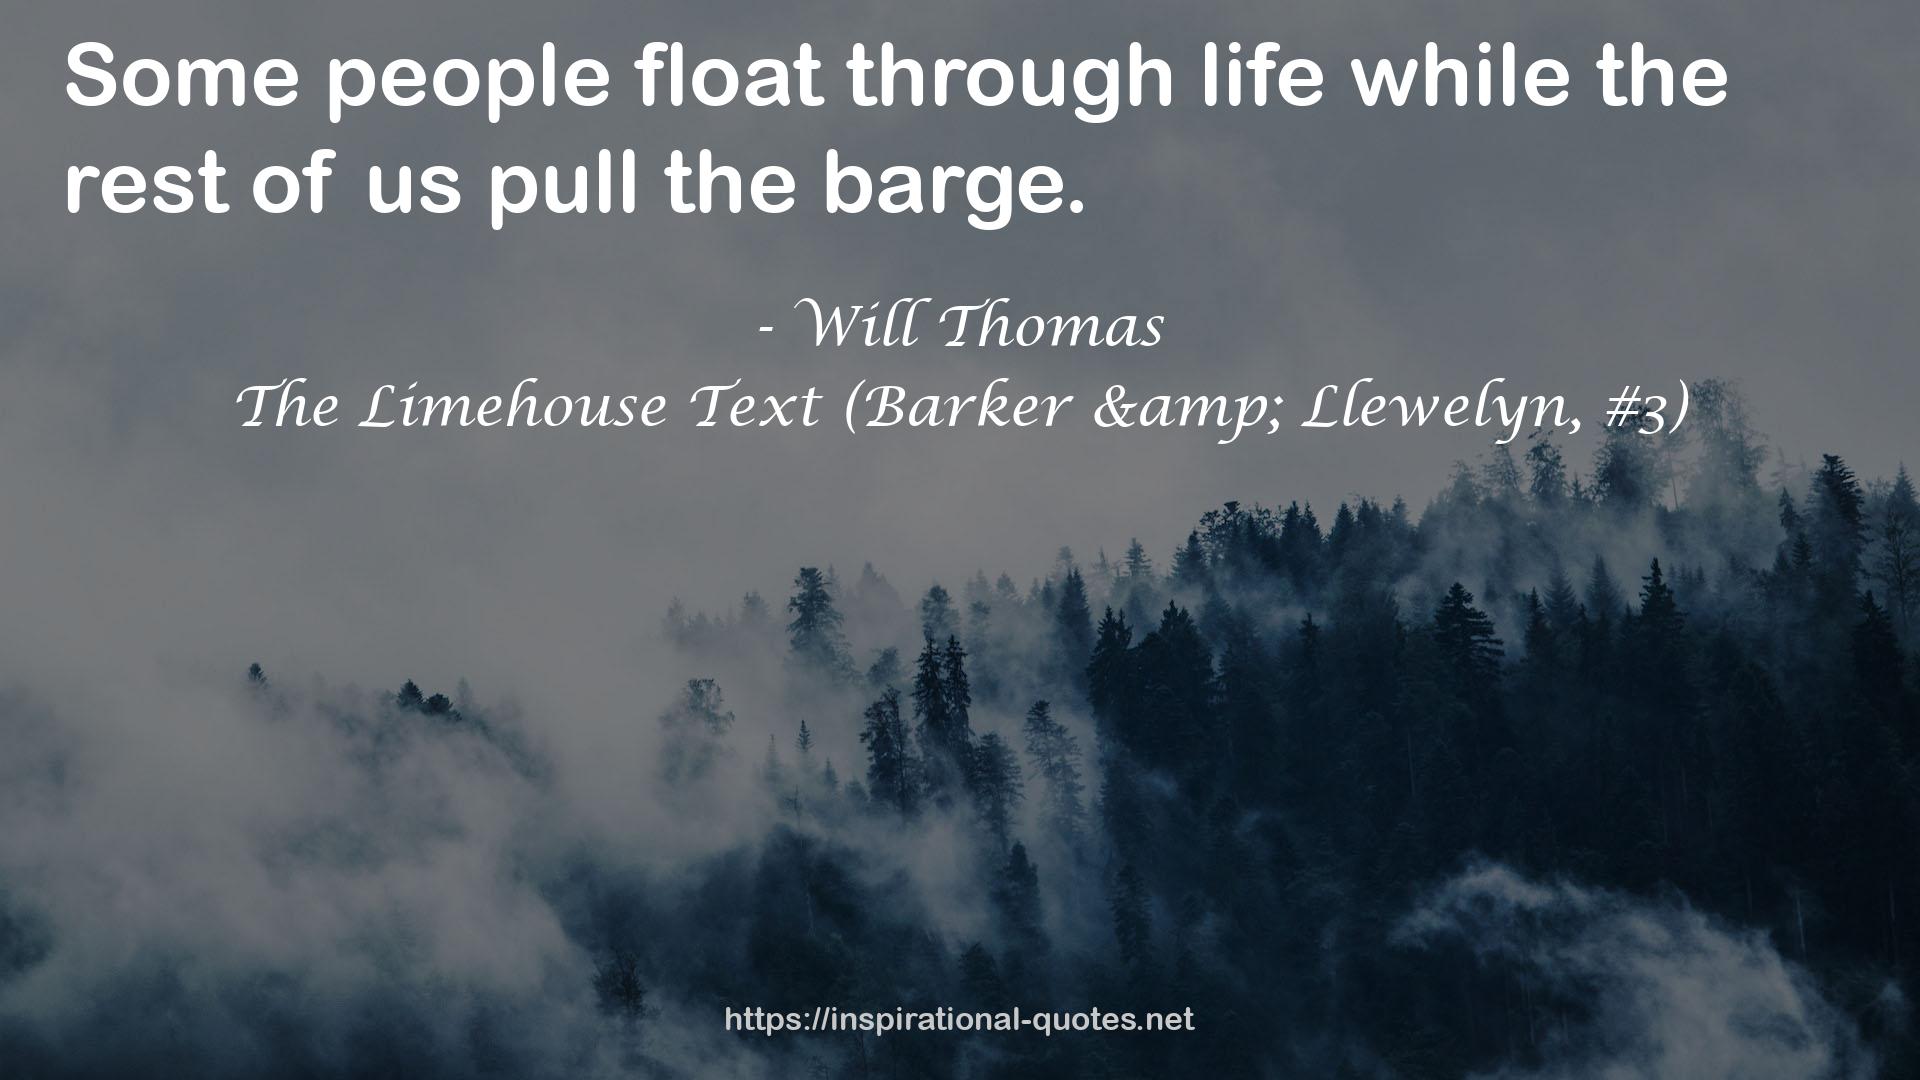 The Limehouse Text (Barker & Llewelyn, #3) QUOTES